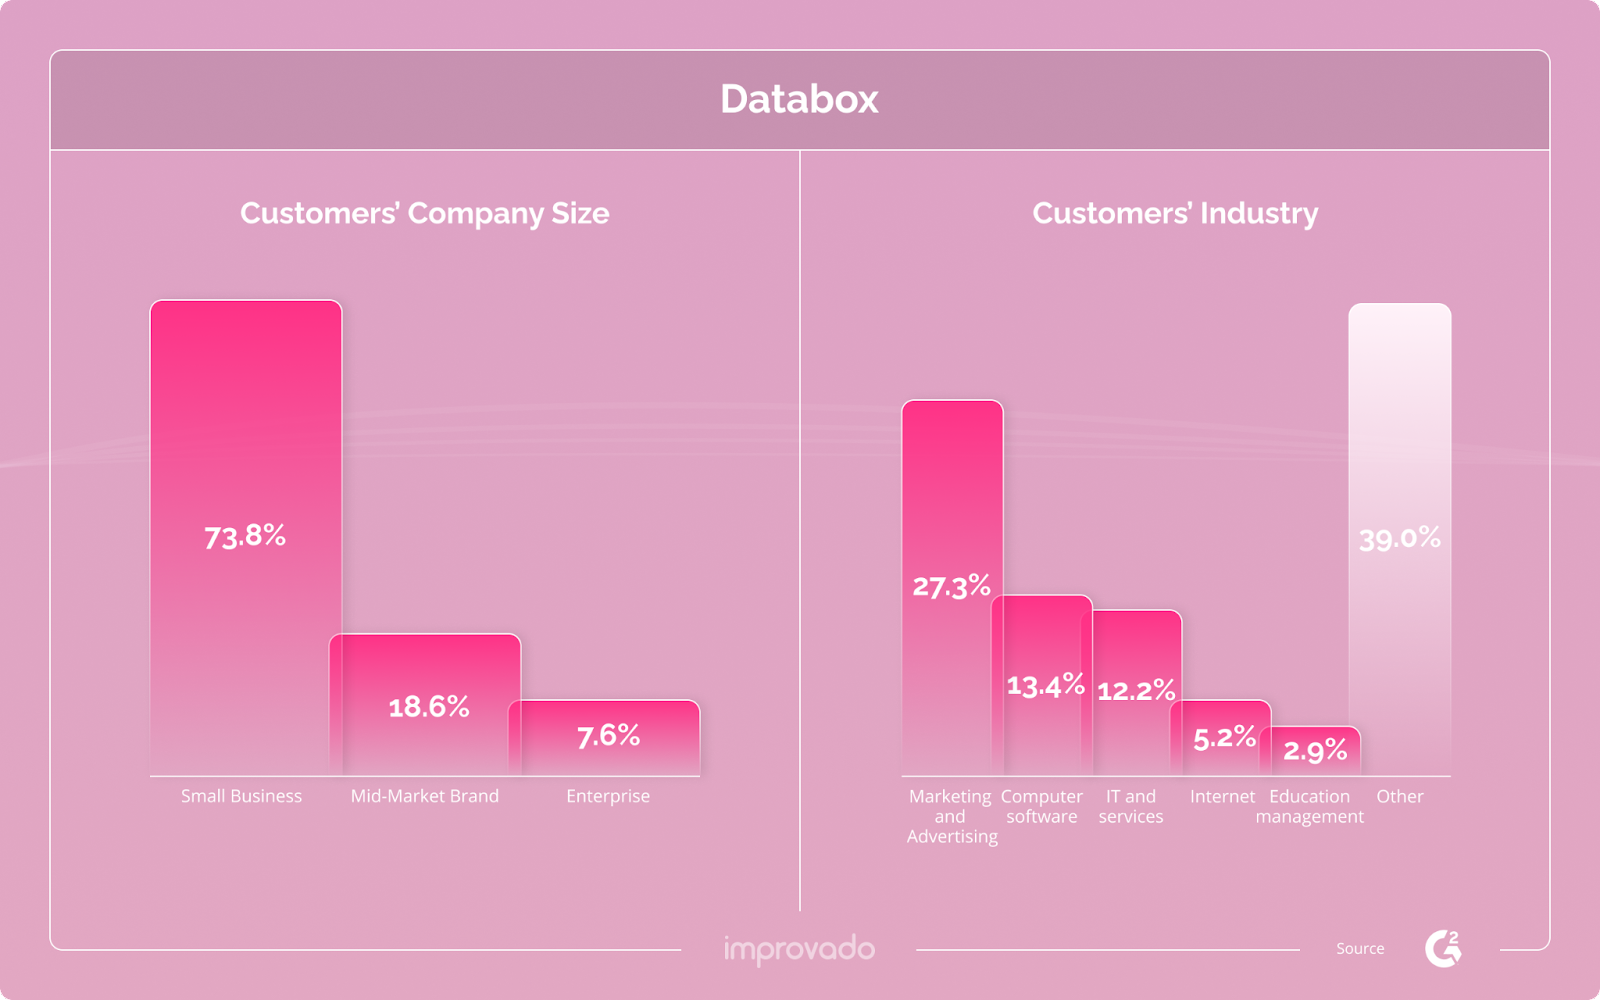 Databox is mostly used by small businesses.